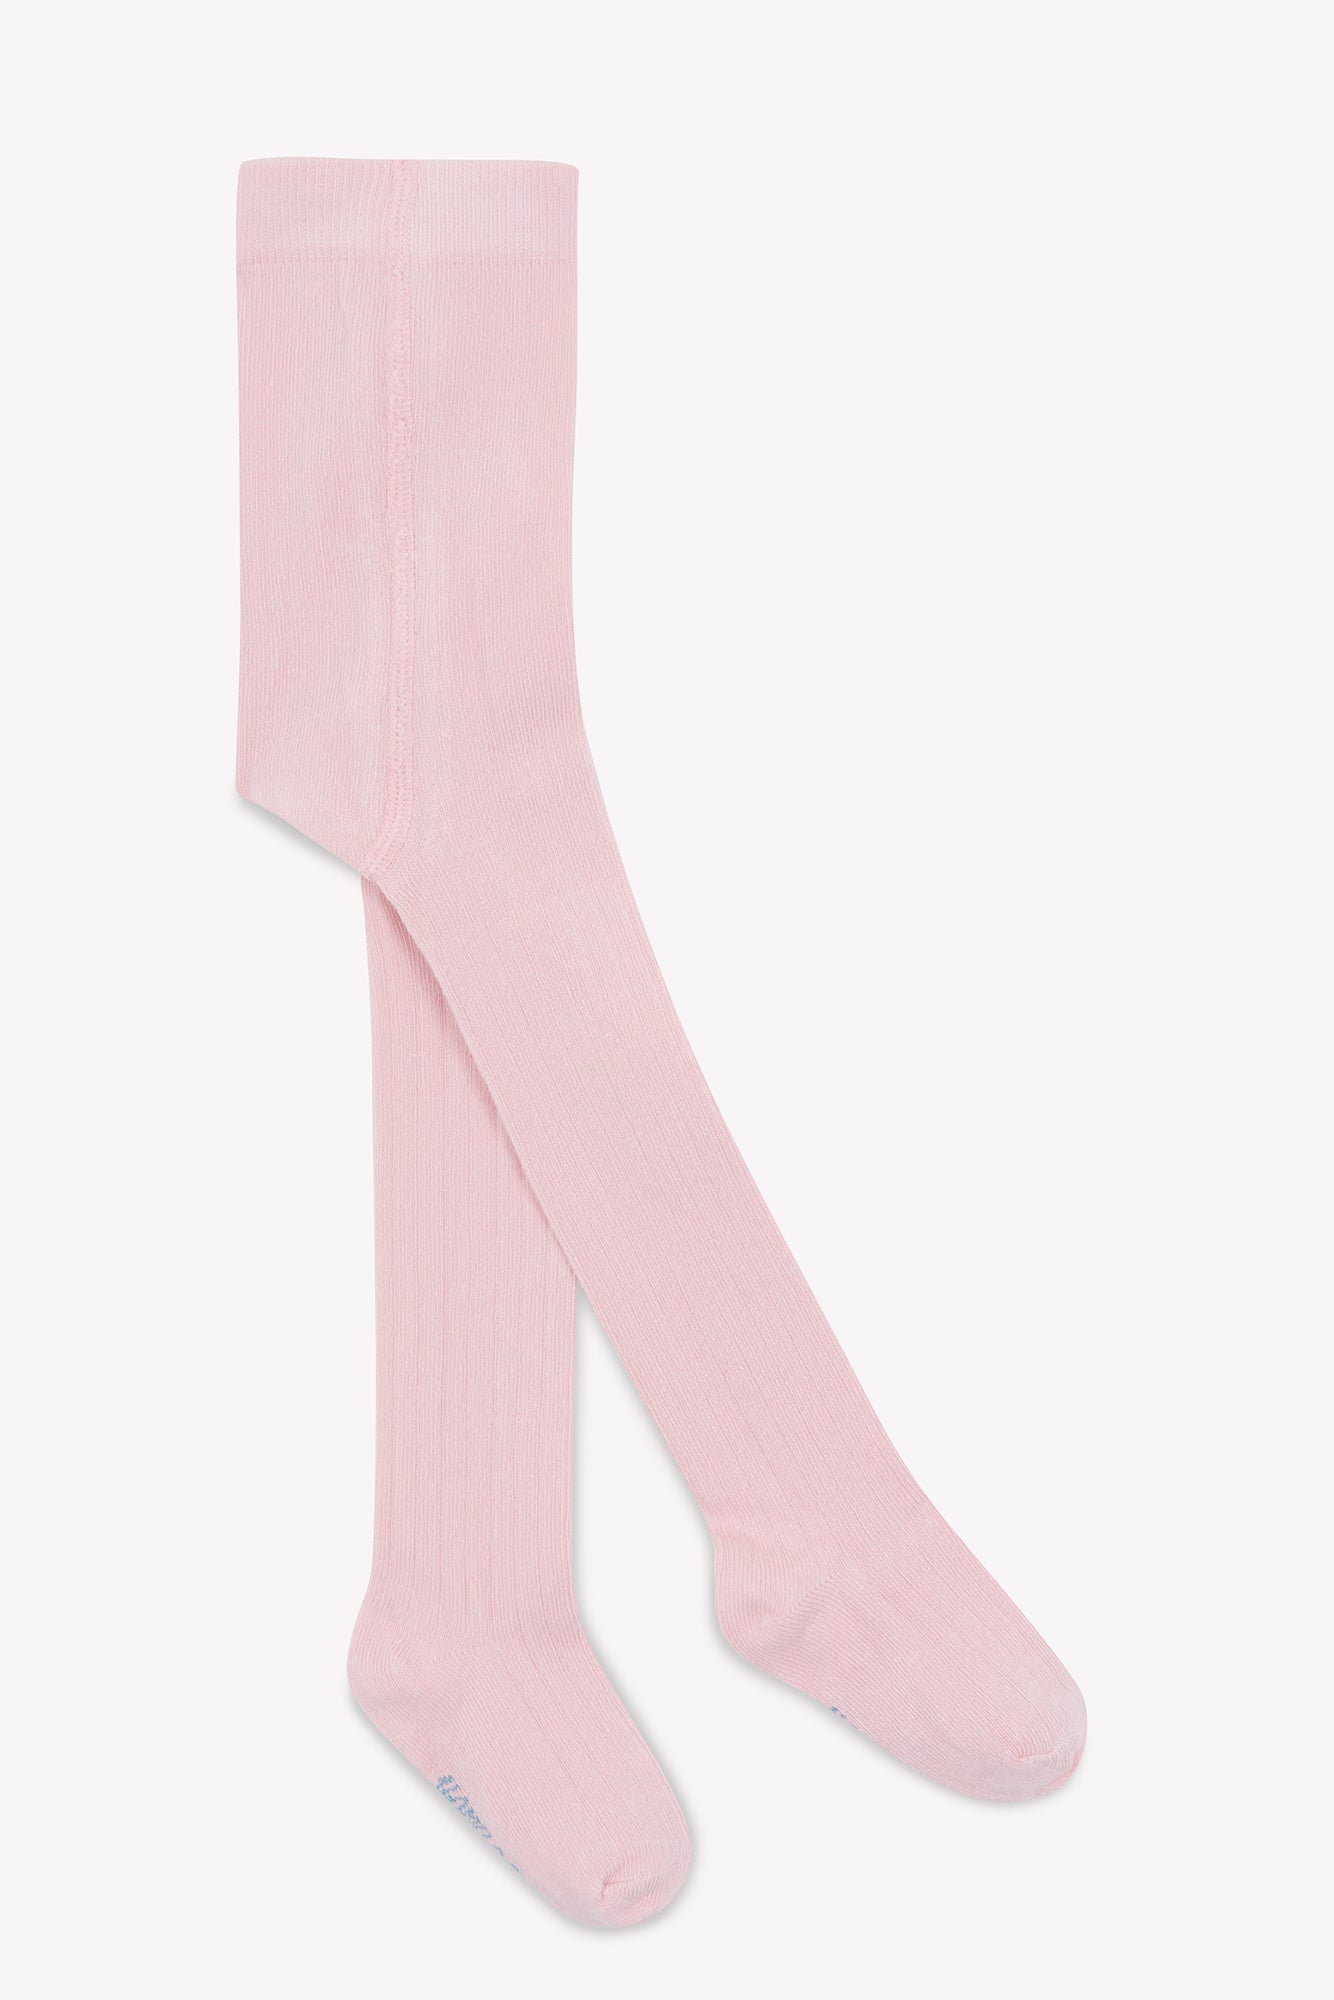 Childs Light Pink Tights